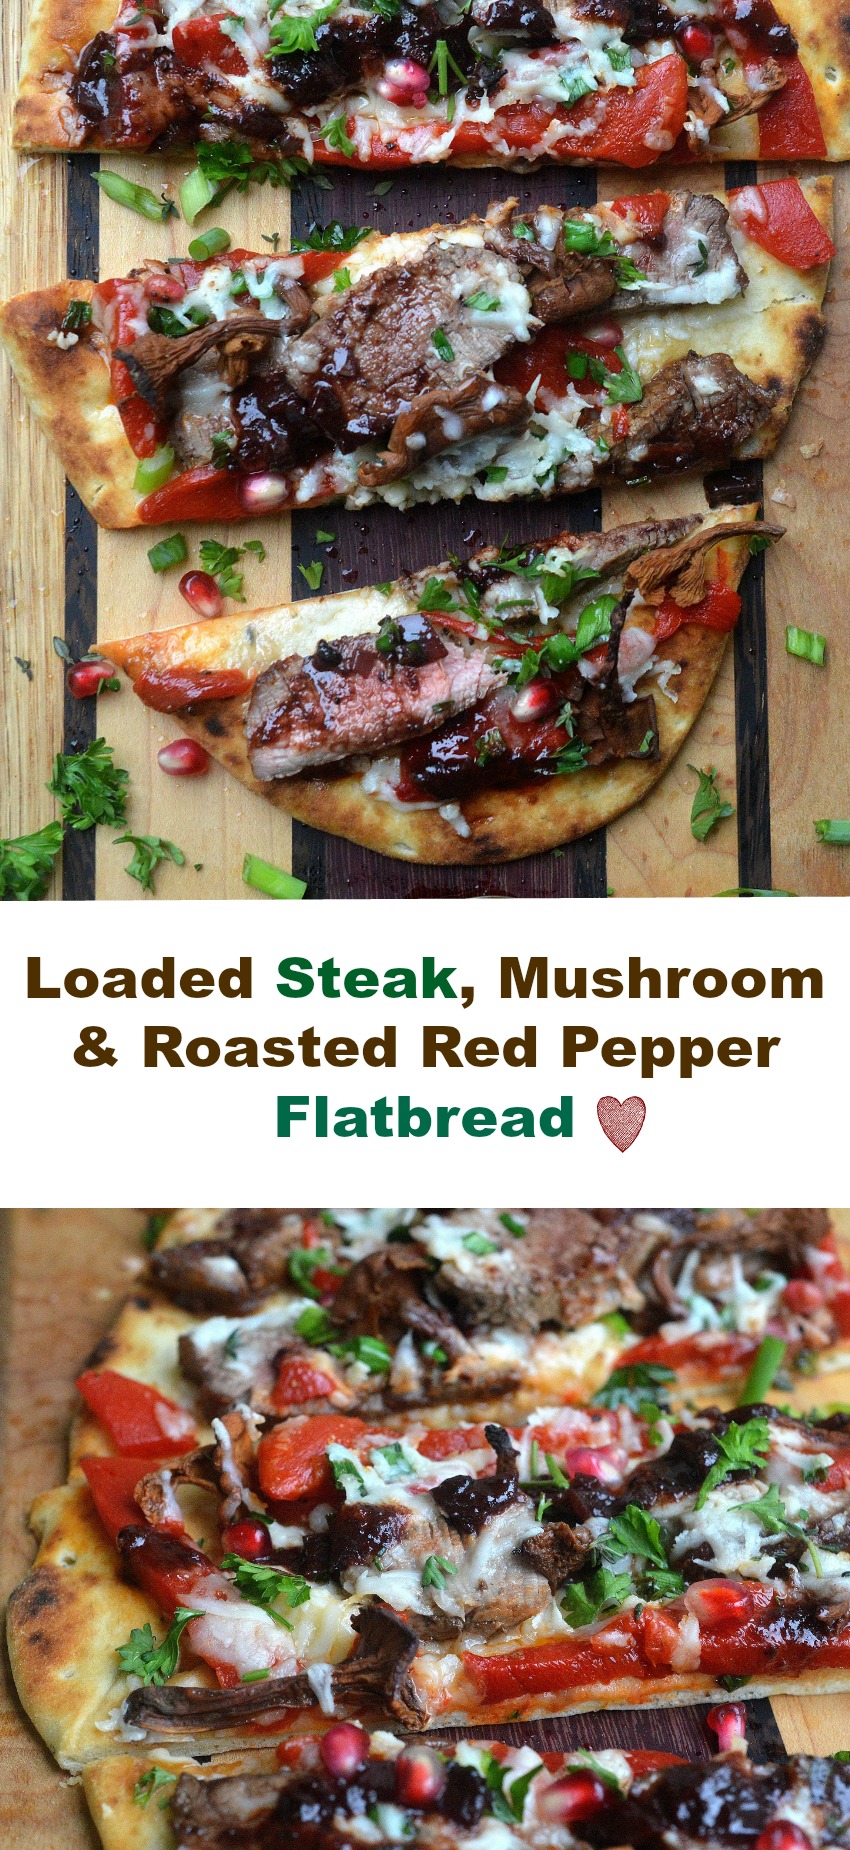 Loaded Steak, Mushroom & Roasted Red Pepper Flatbread, delicious and easy too!